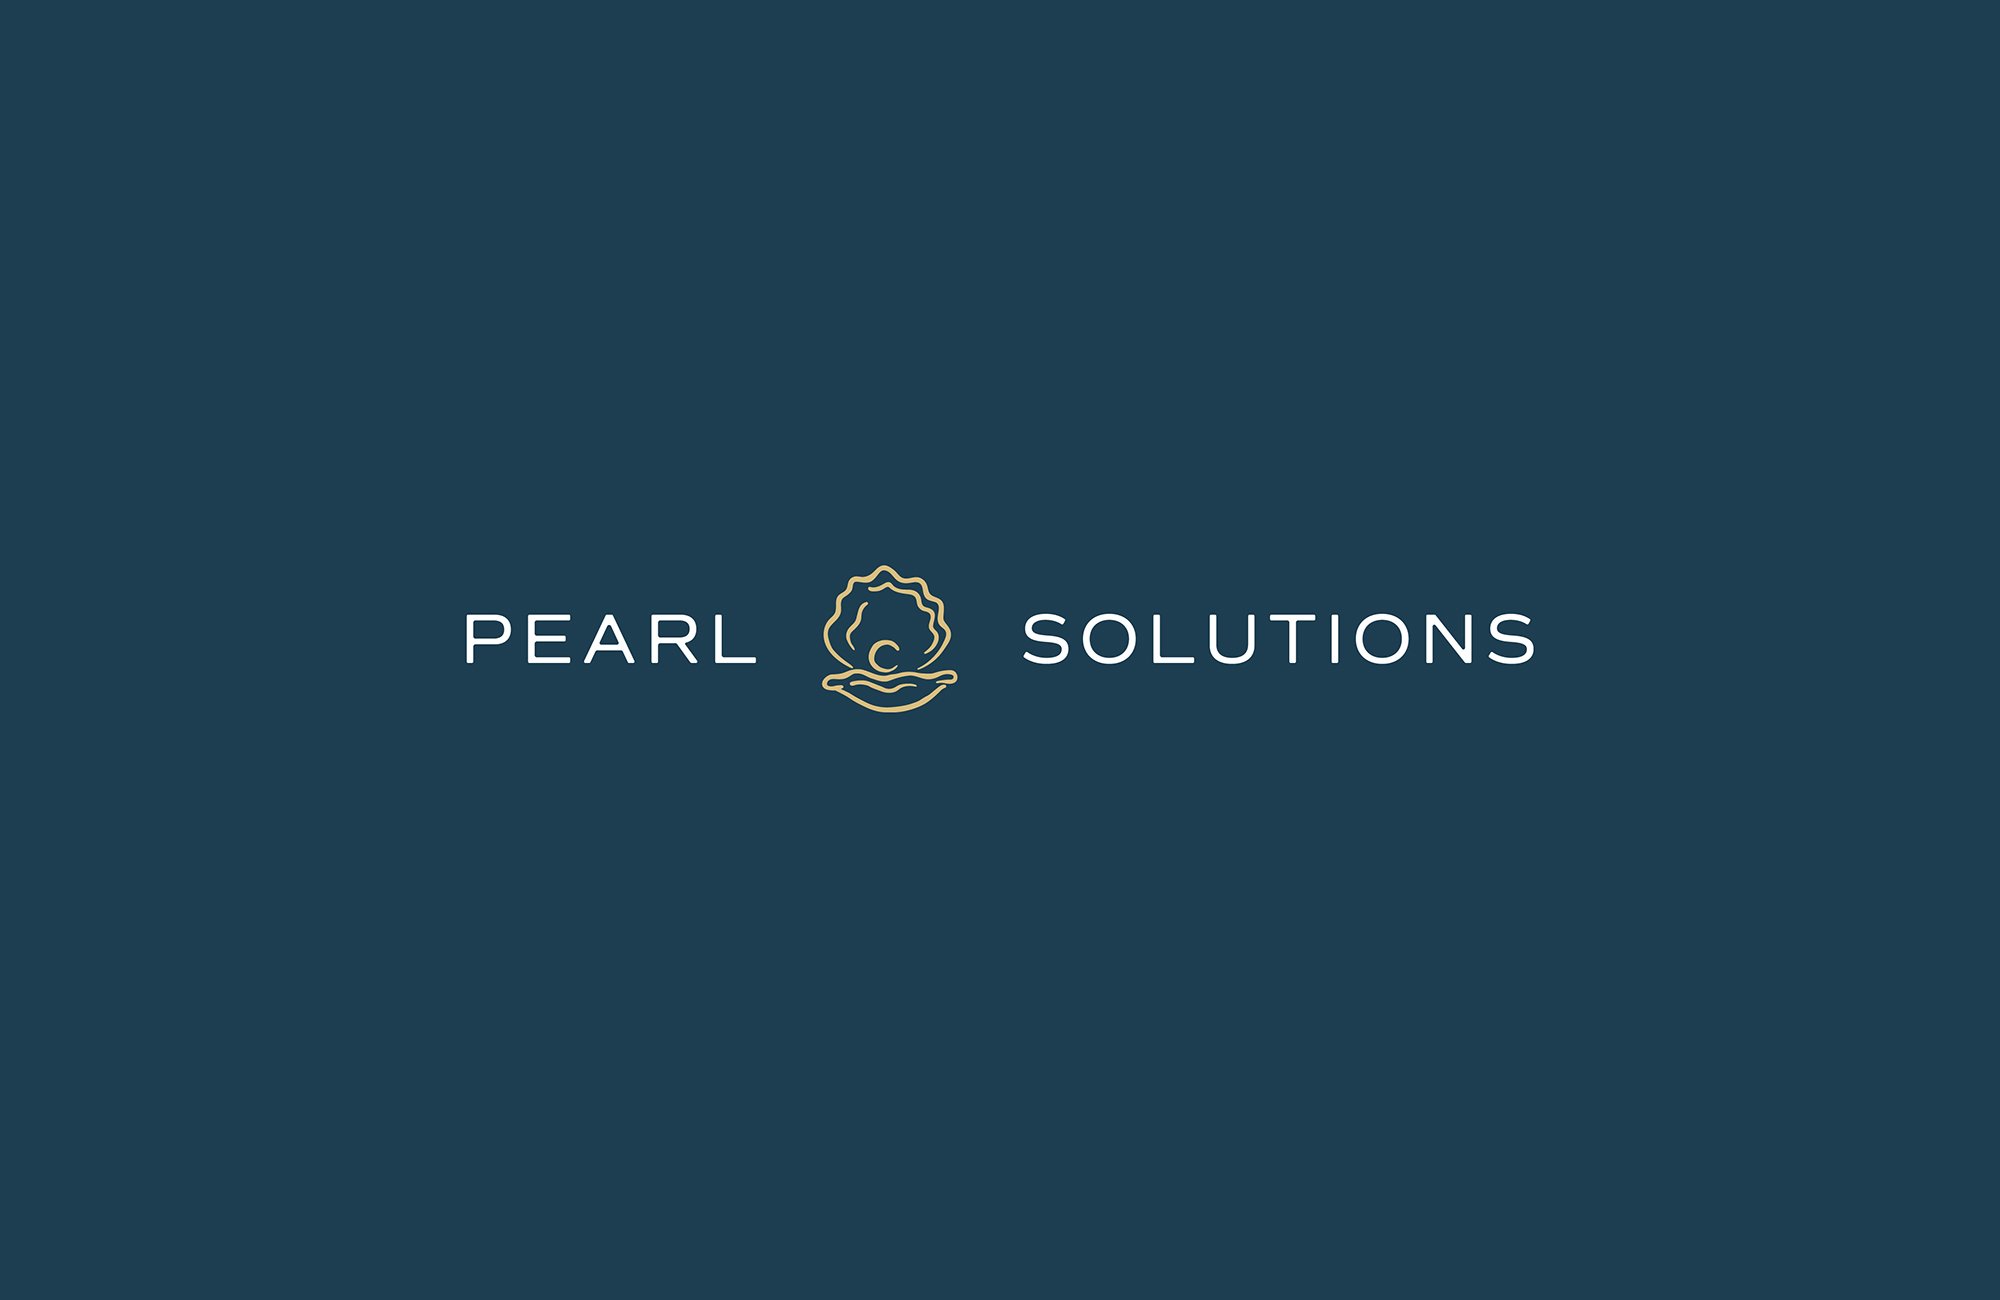 more-ours-pearl-solutions-logo1.jpg